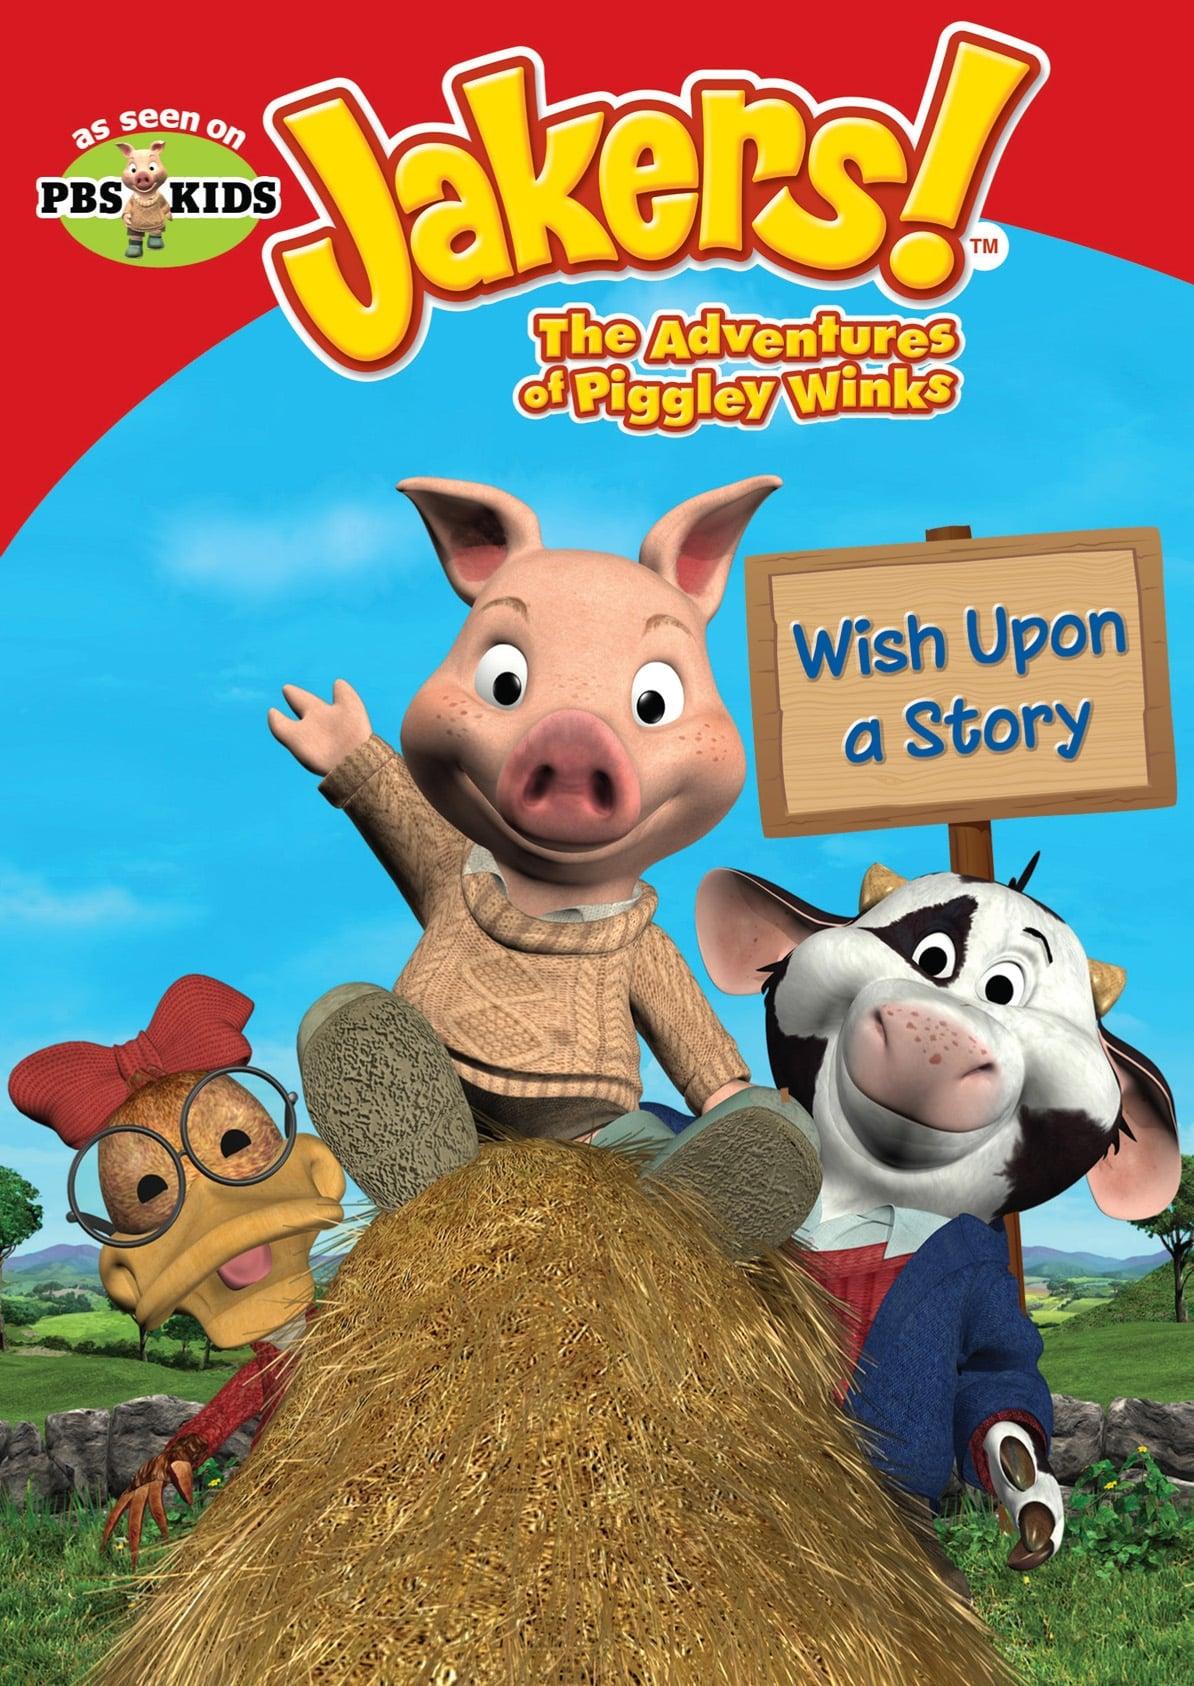 Jakers! The Adventures of Piggley Winks poster